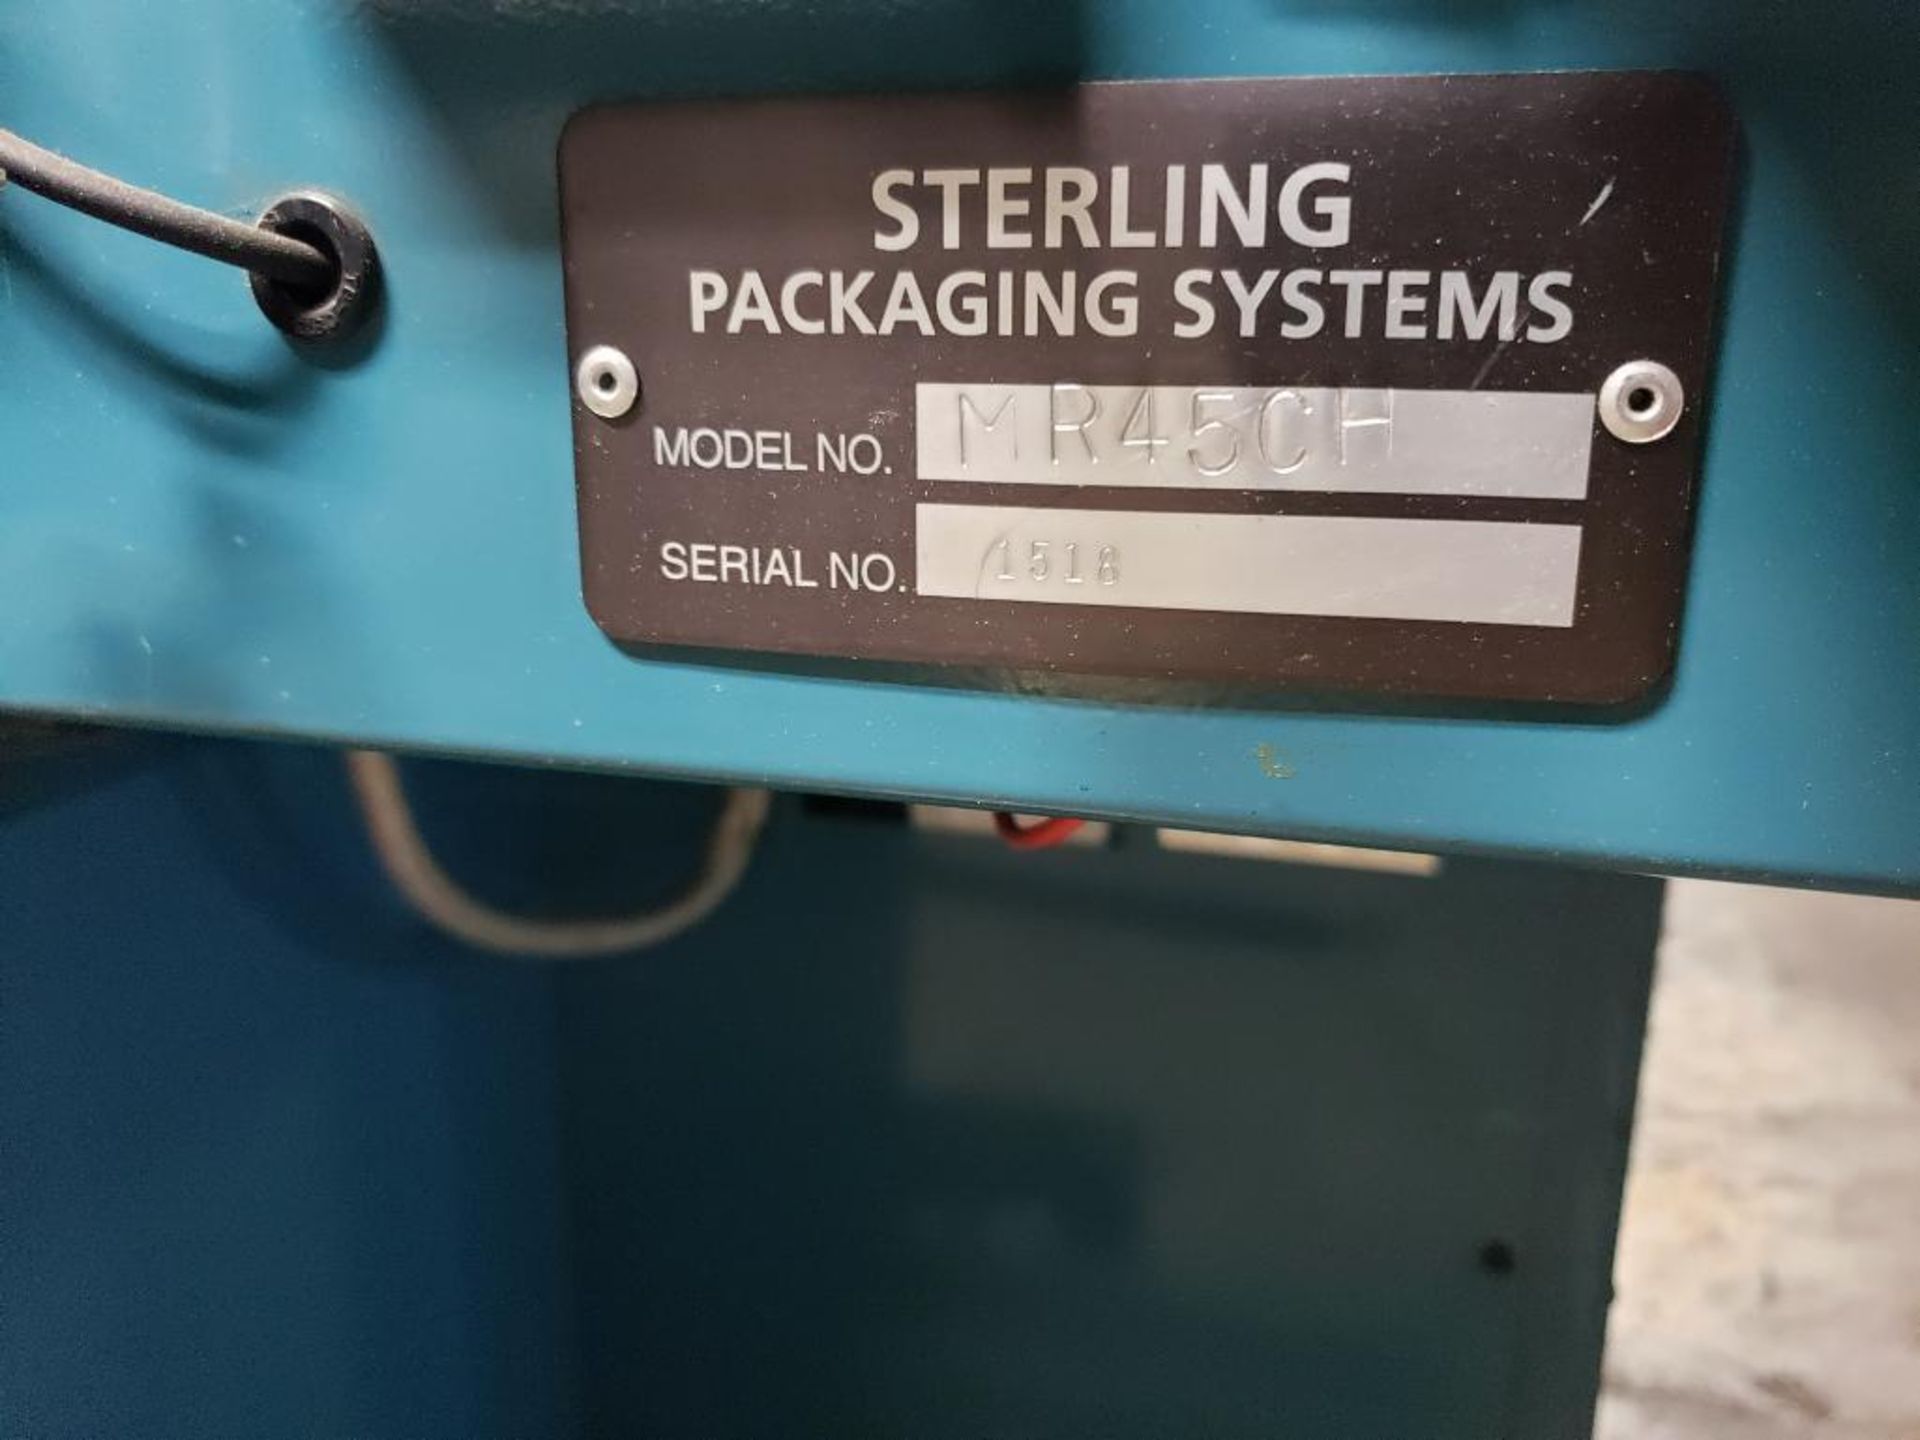 Sterling packaging systems automatic banding machine. Model MR45CH. - Image 6 of 10